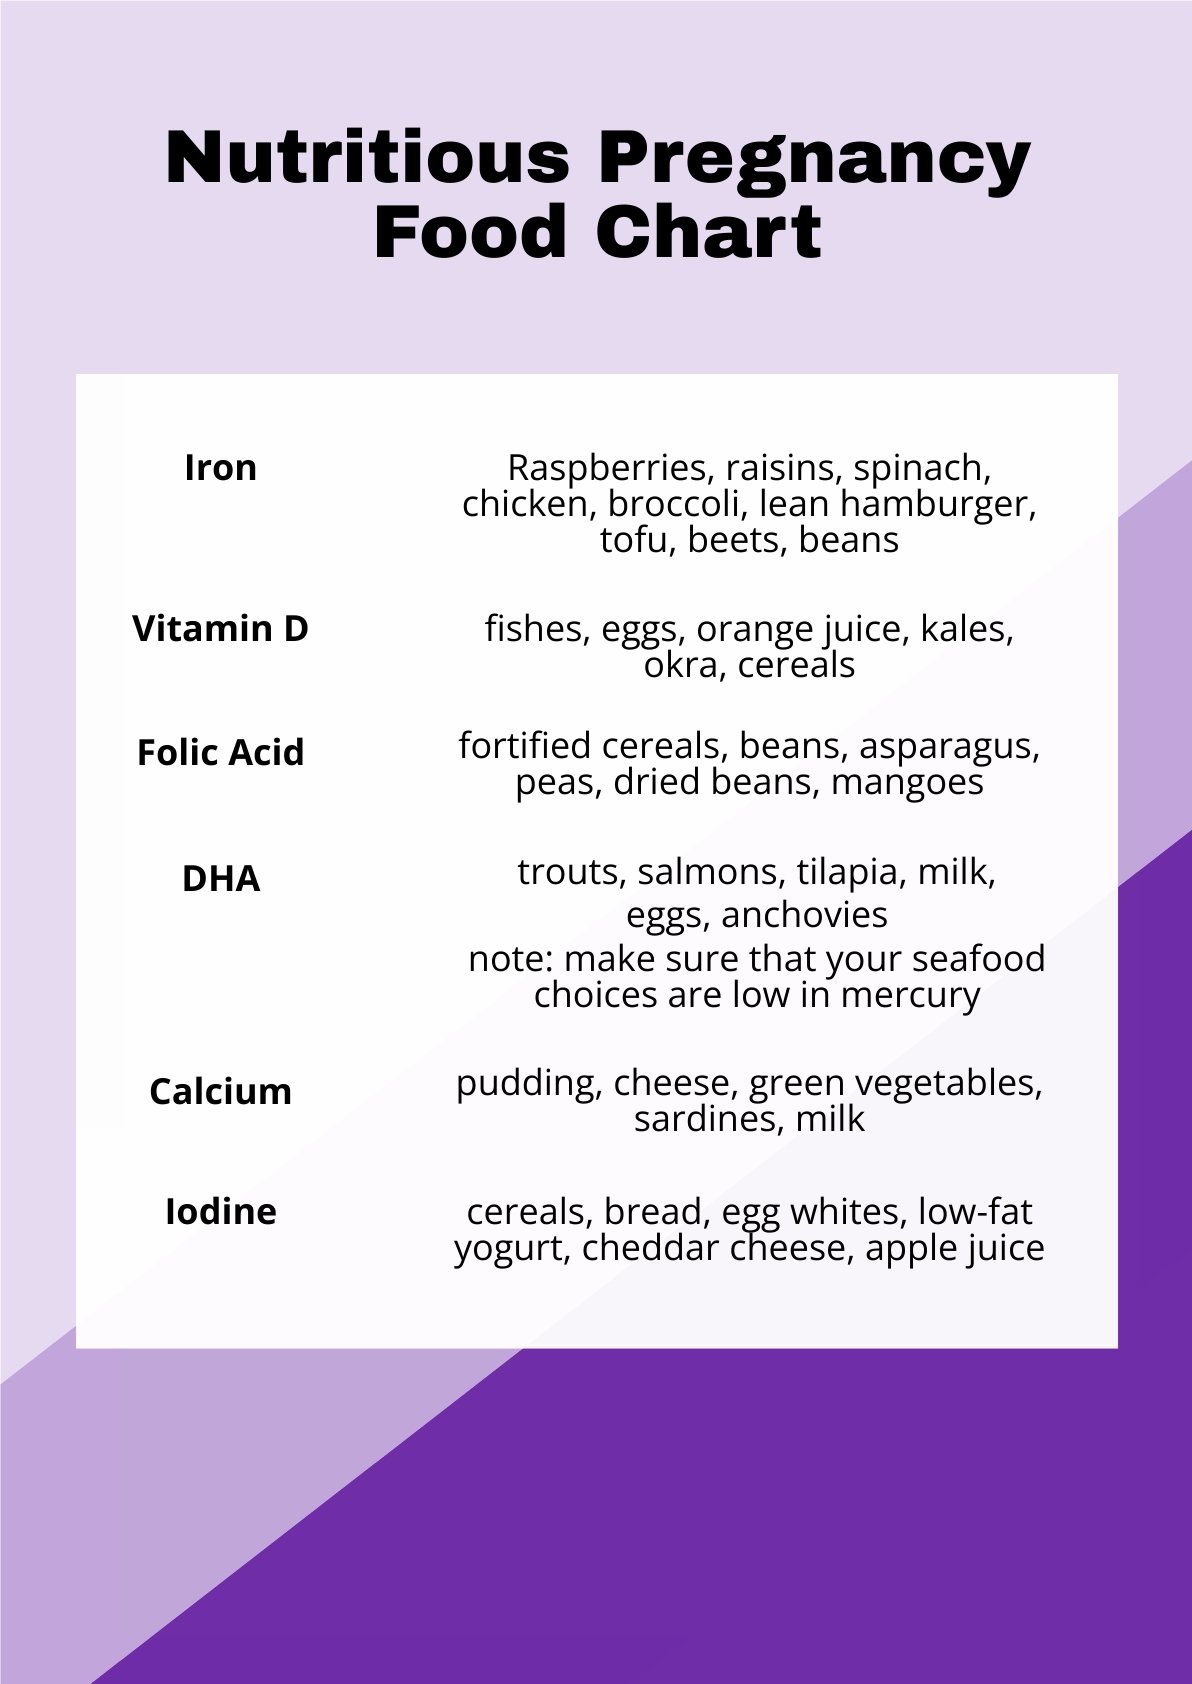 Nutritious Pregnancy Food Chart